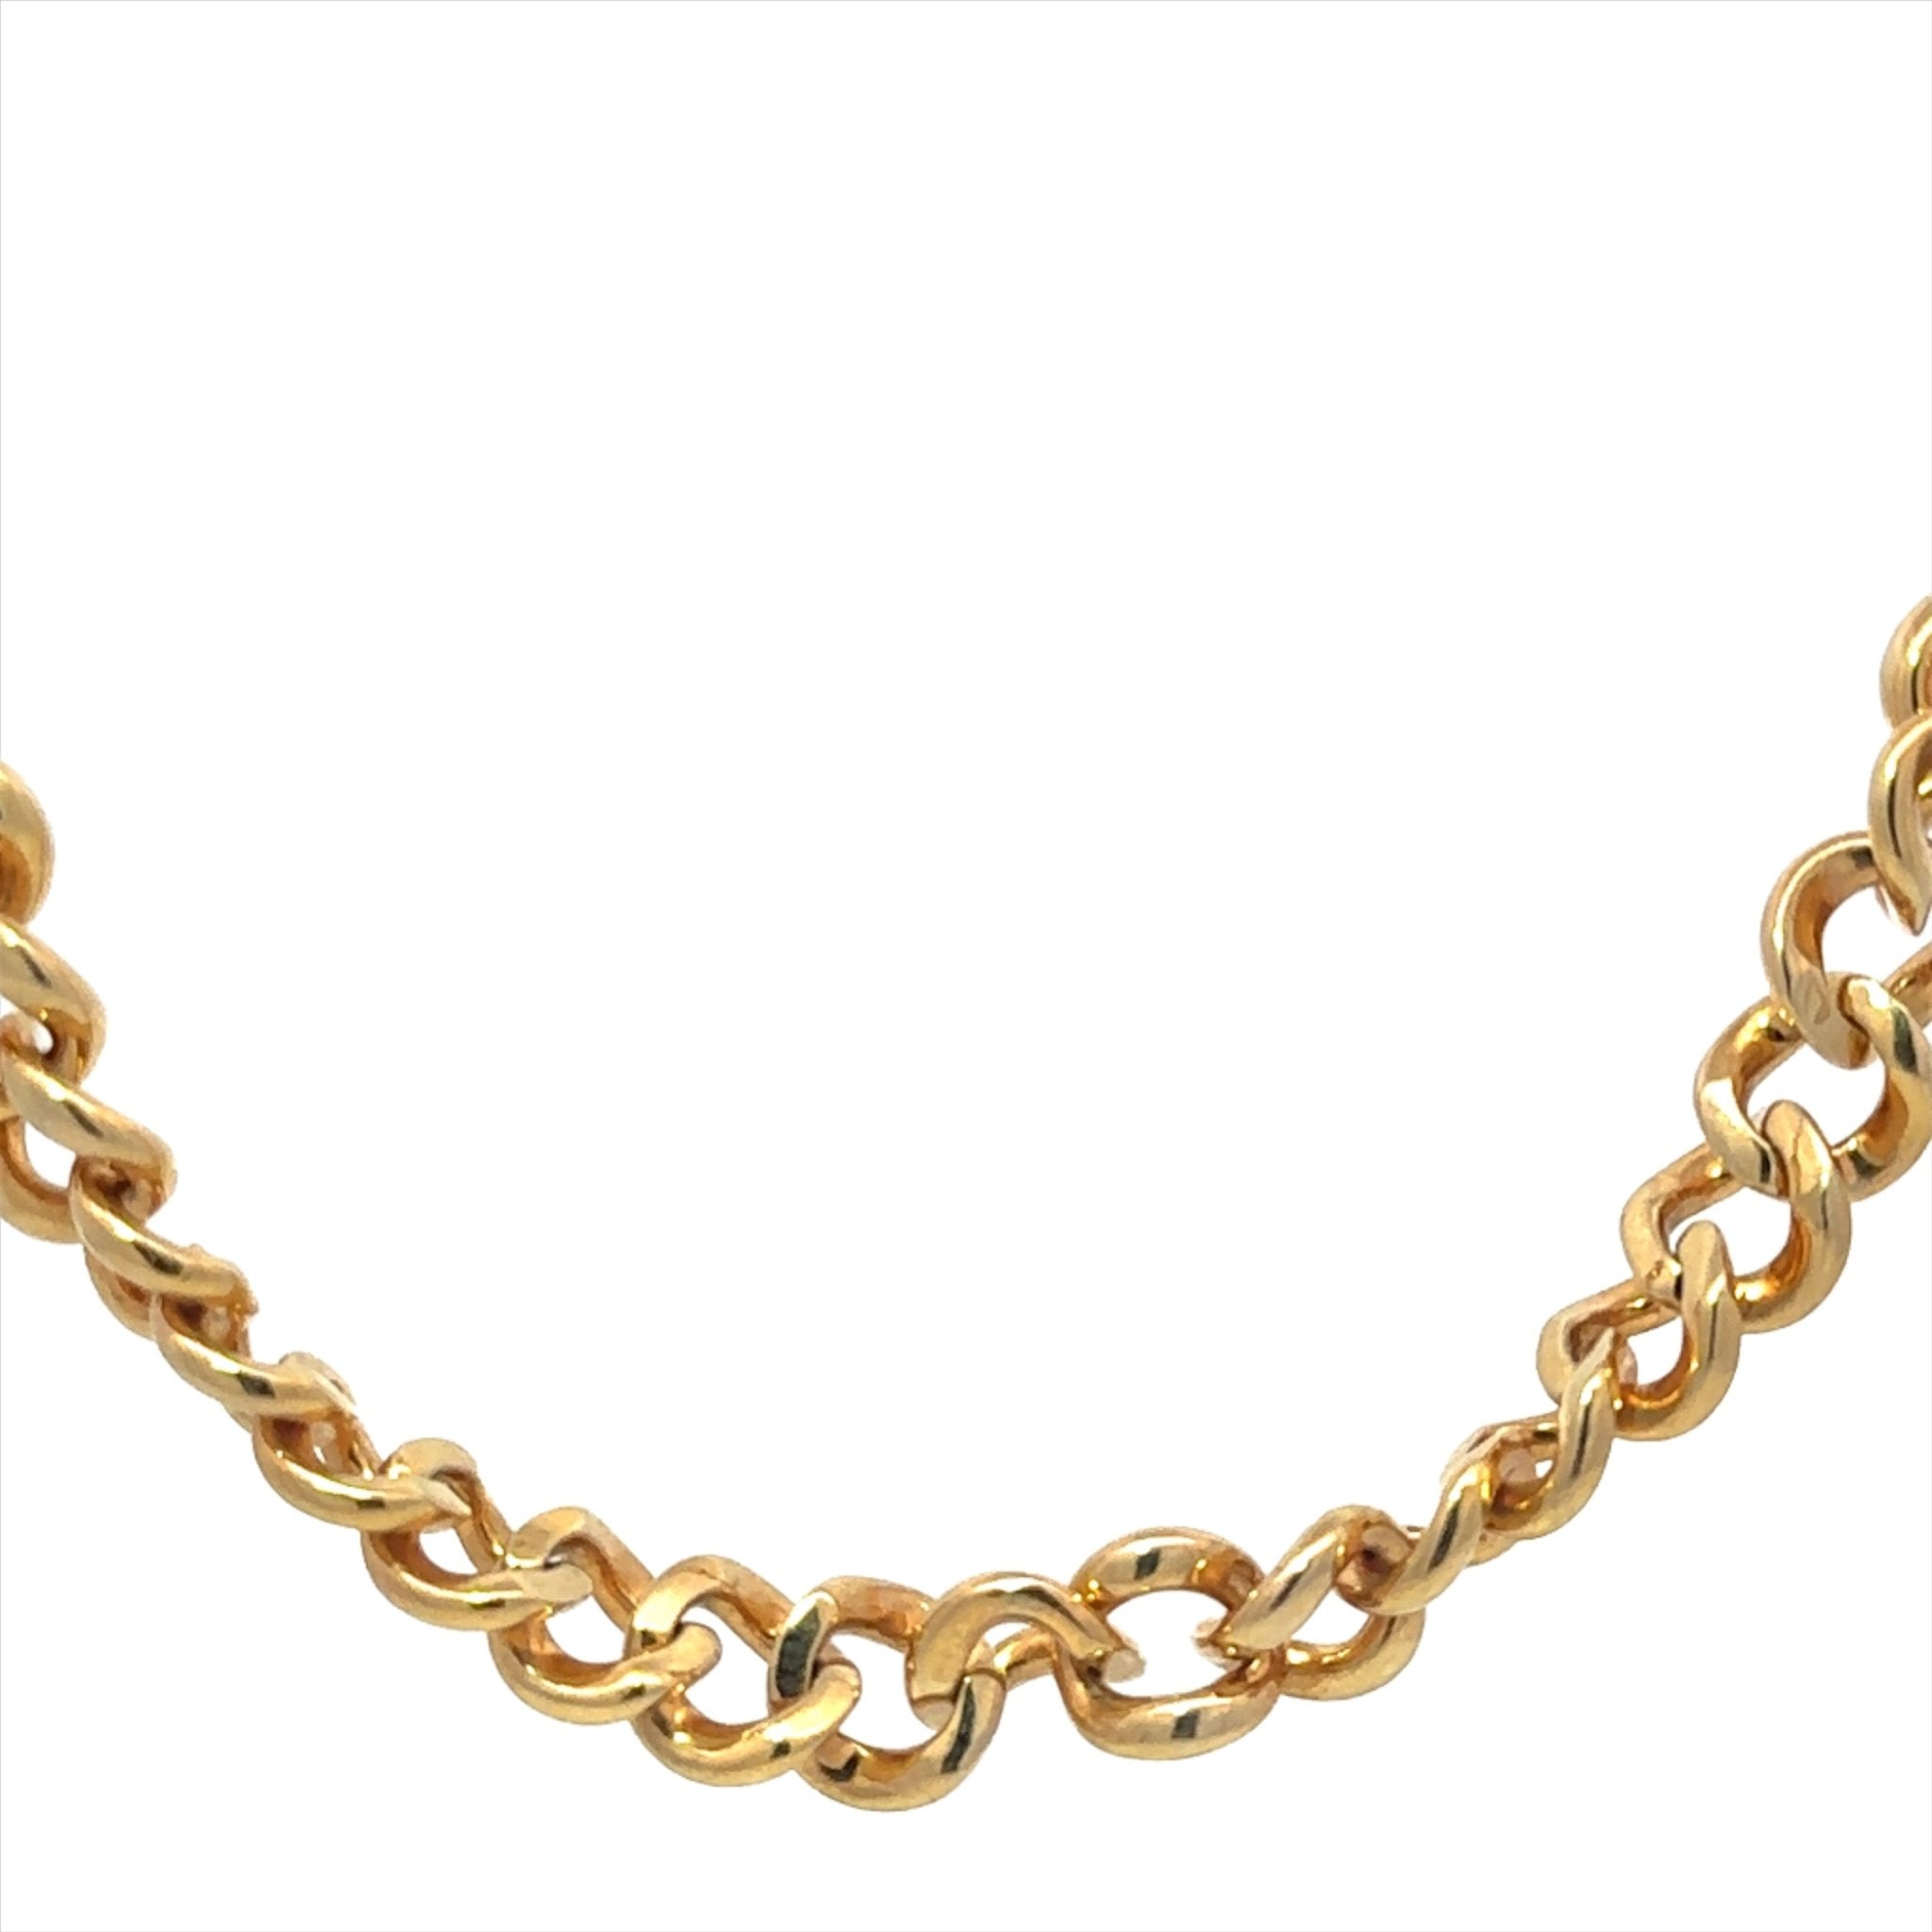 Beautiful Gold Plated Silver Chain by Natkina